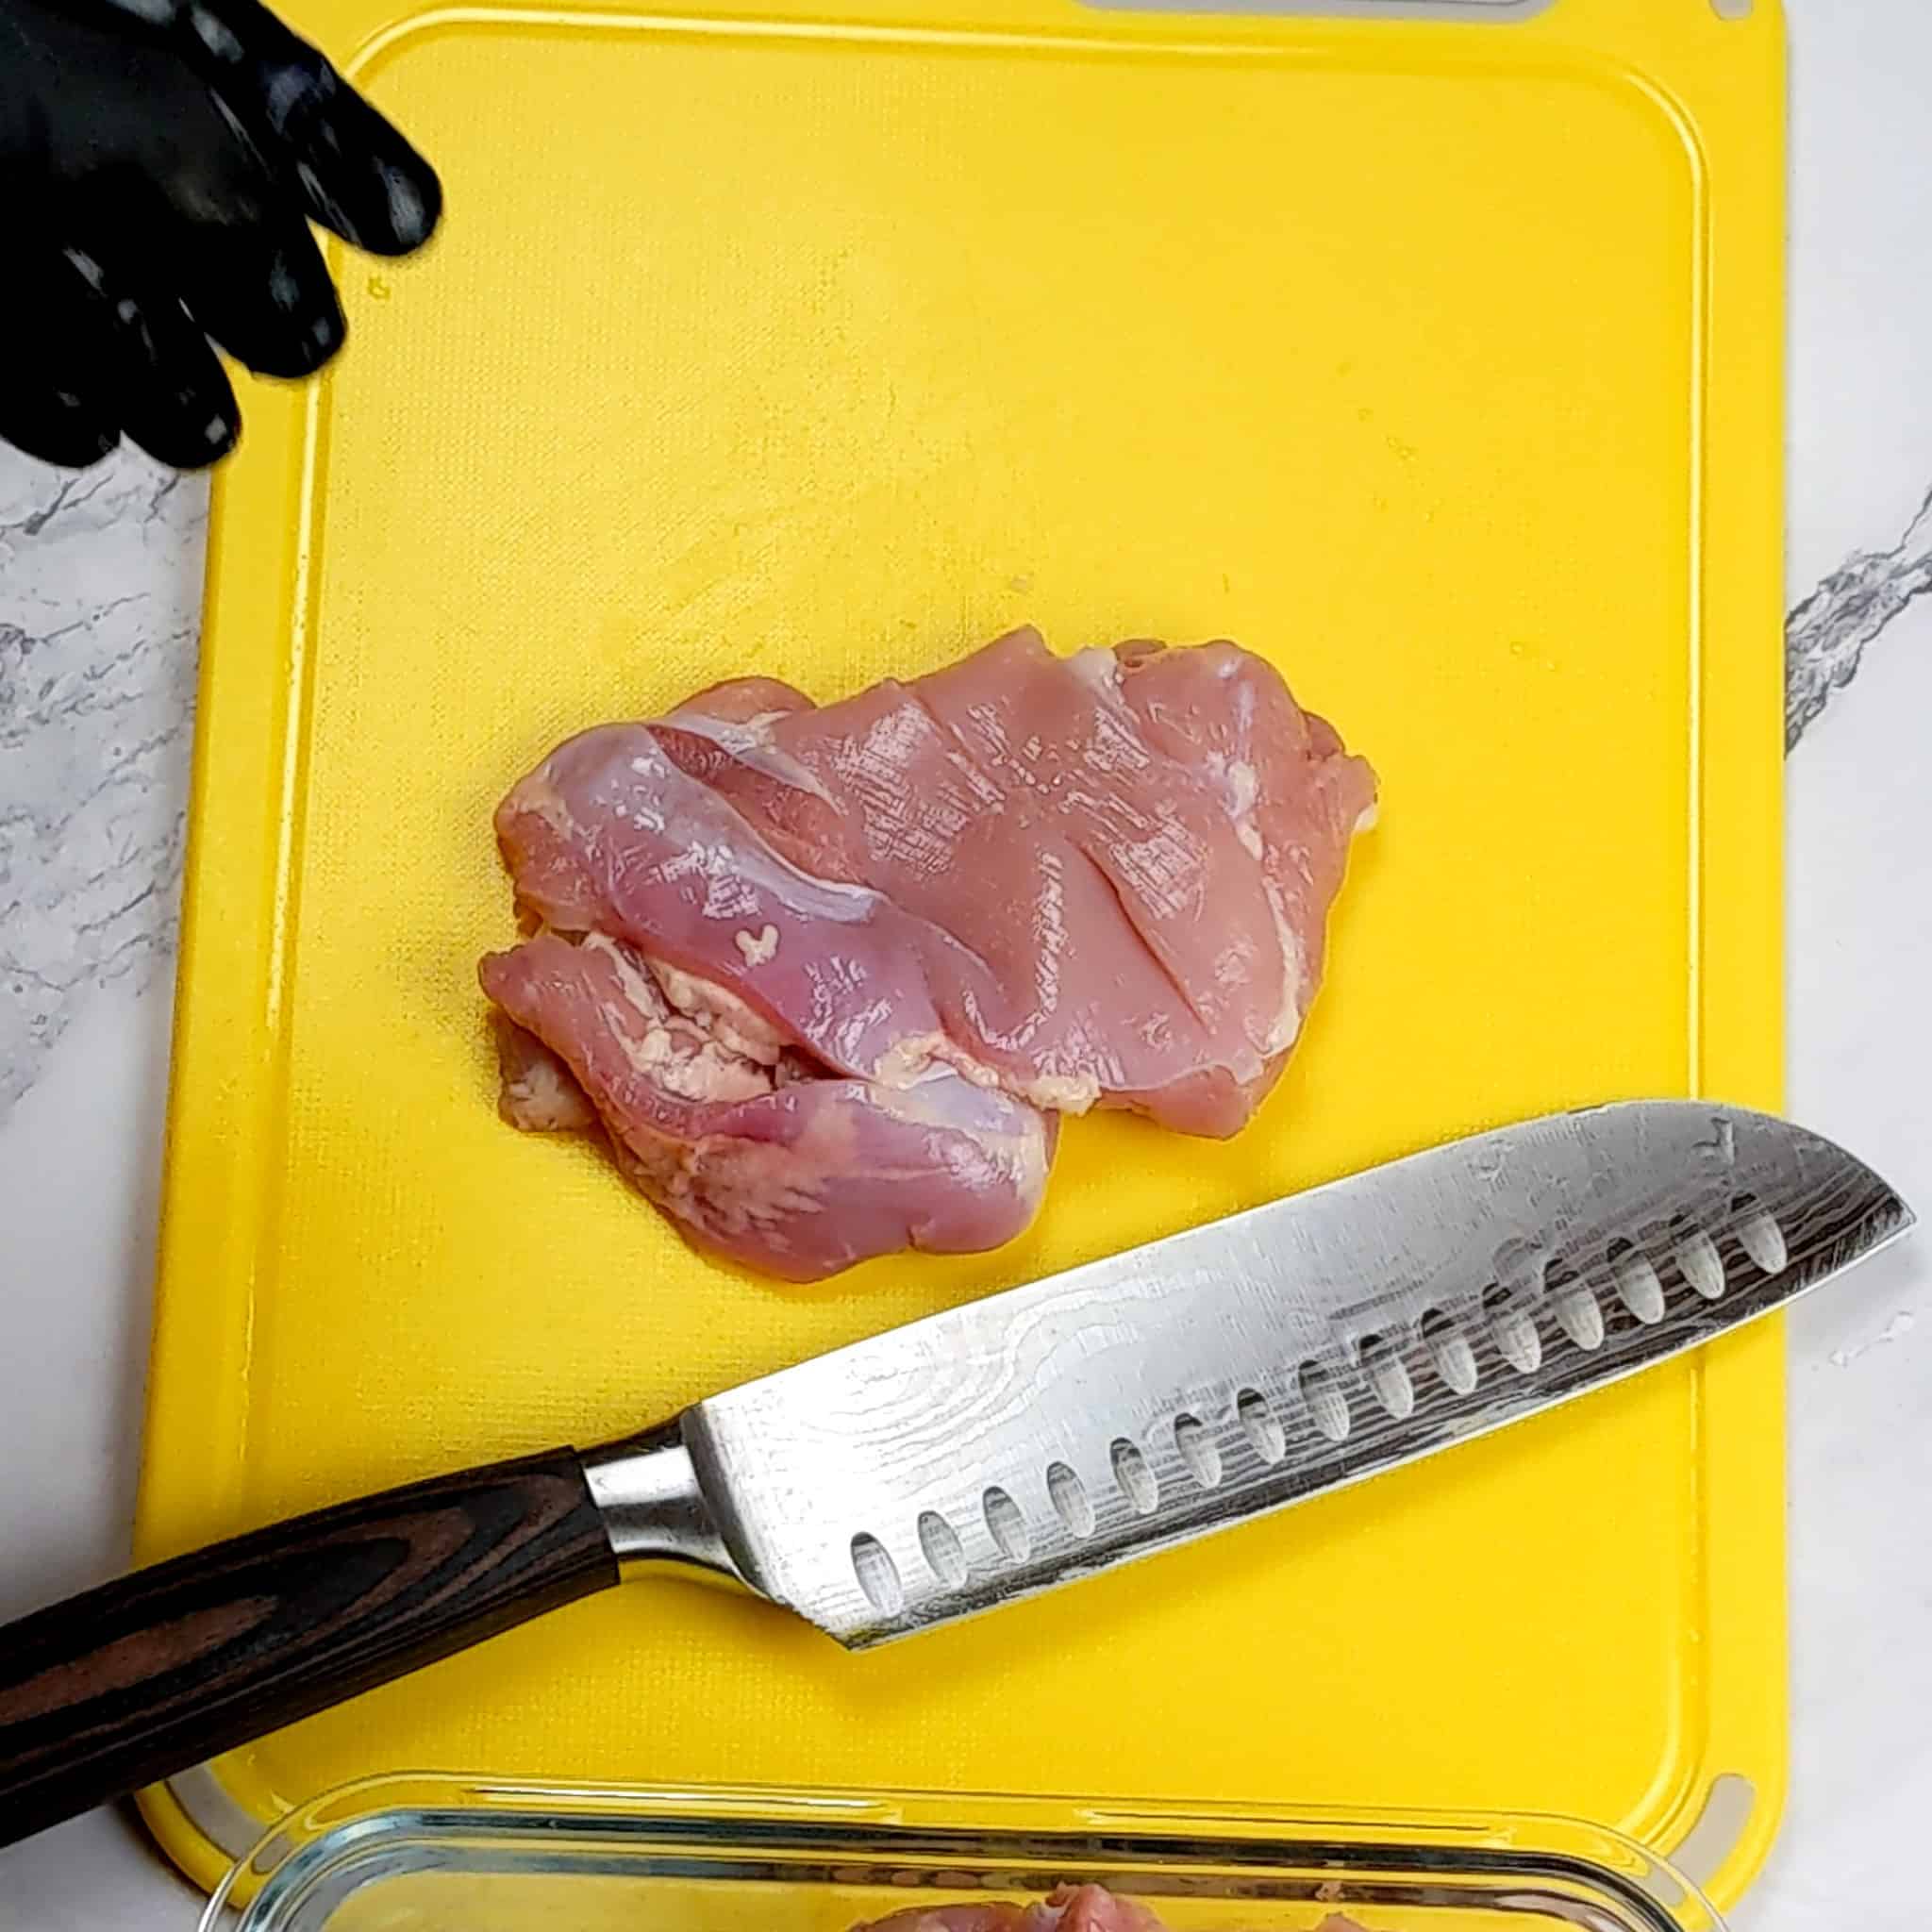 a chicken thigh on a plastic cutting board laying next to a santoku knife with three slits.